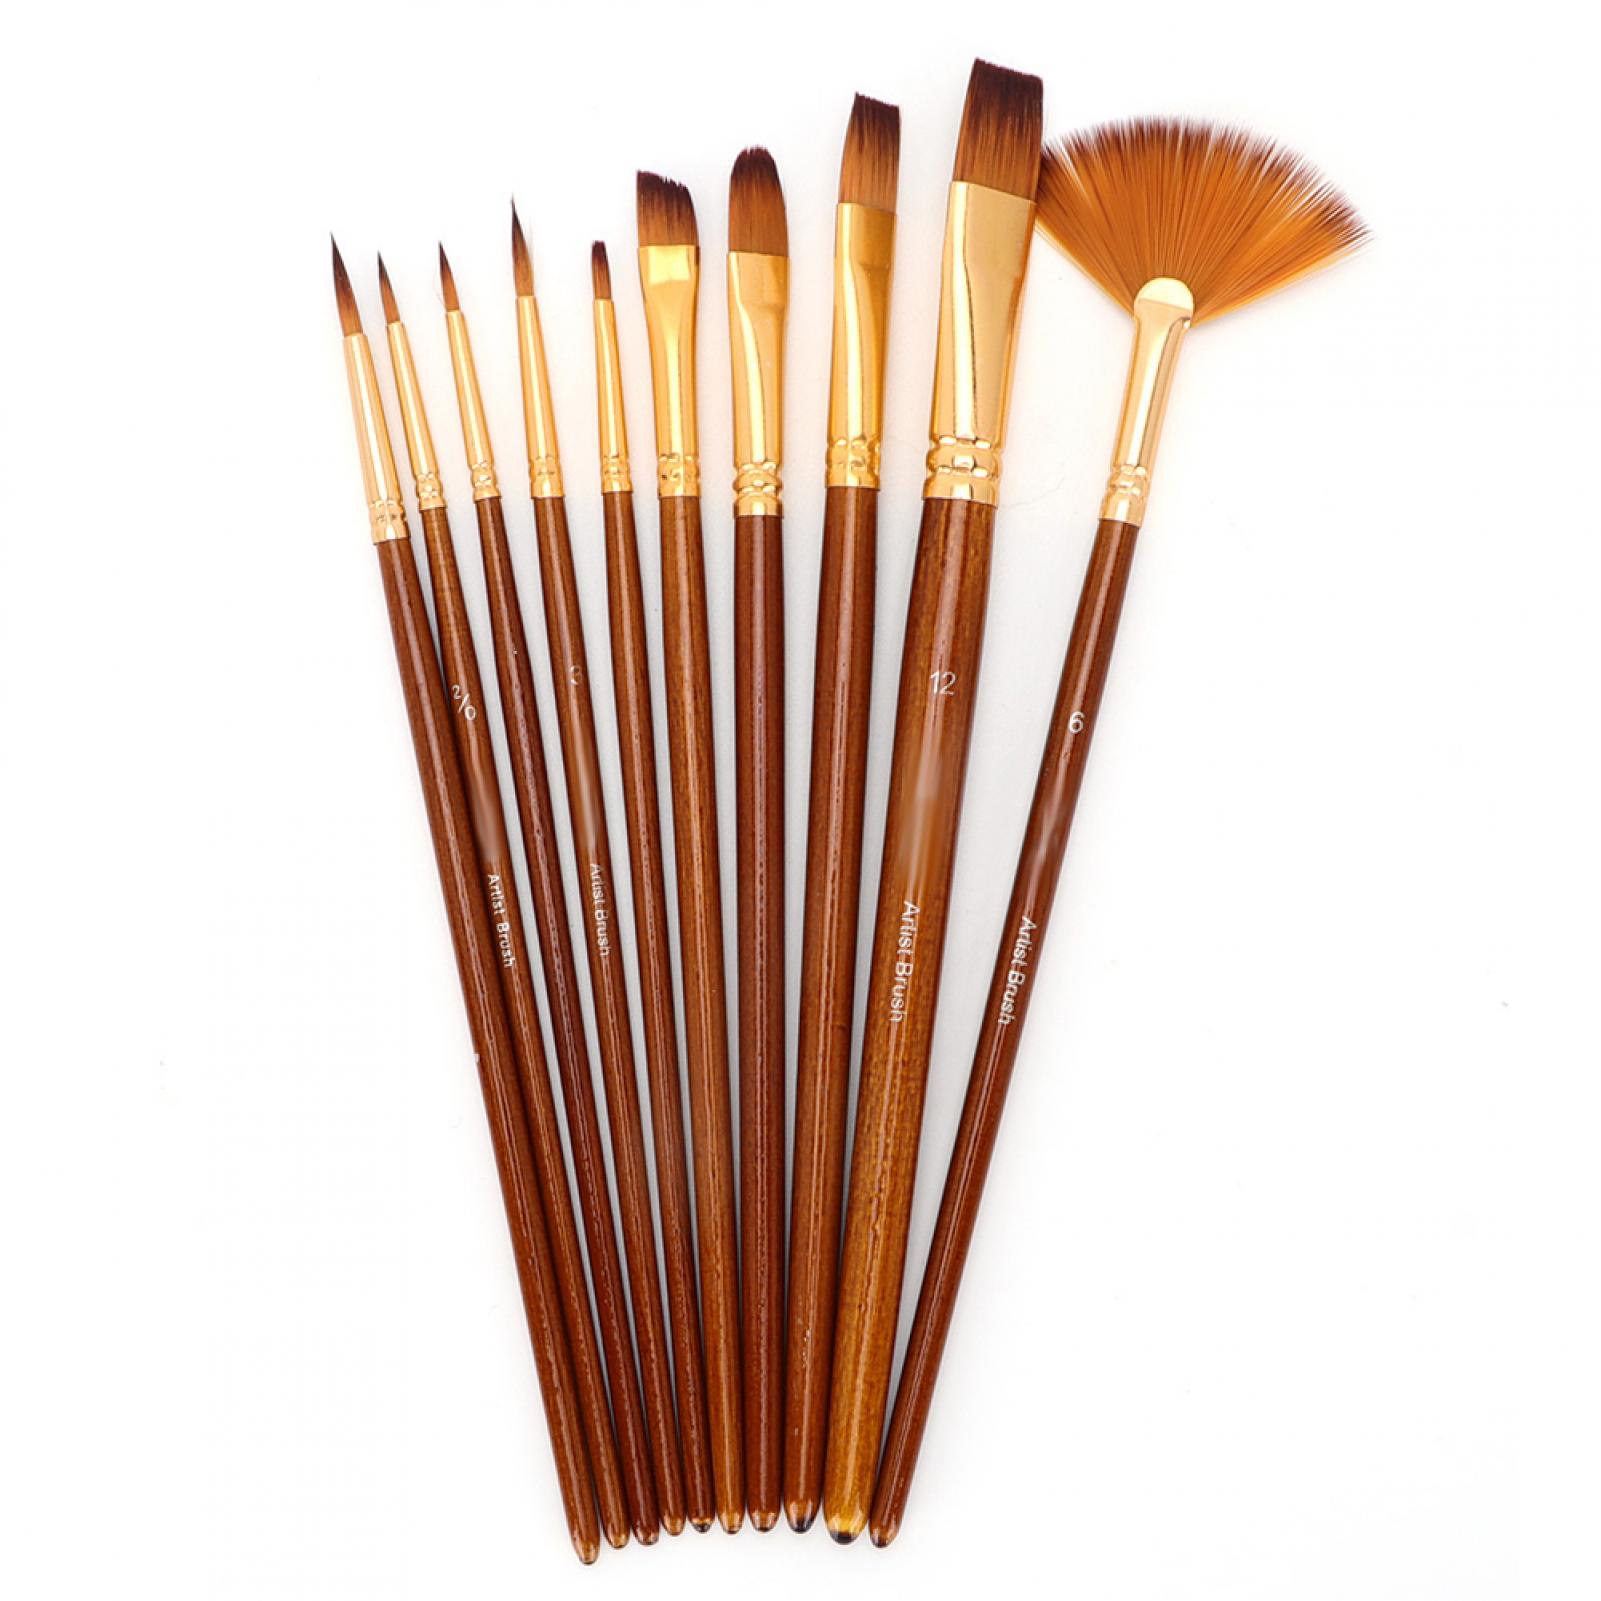 Art Brush, Fine Tip Paint Brush, Art Supplies, Paint Brush, Comfortable  10Pcs For Painter With Different Brush Tips Durable Oil Painting Watercolor  Ect 